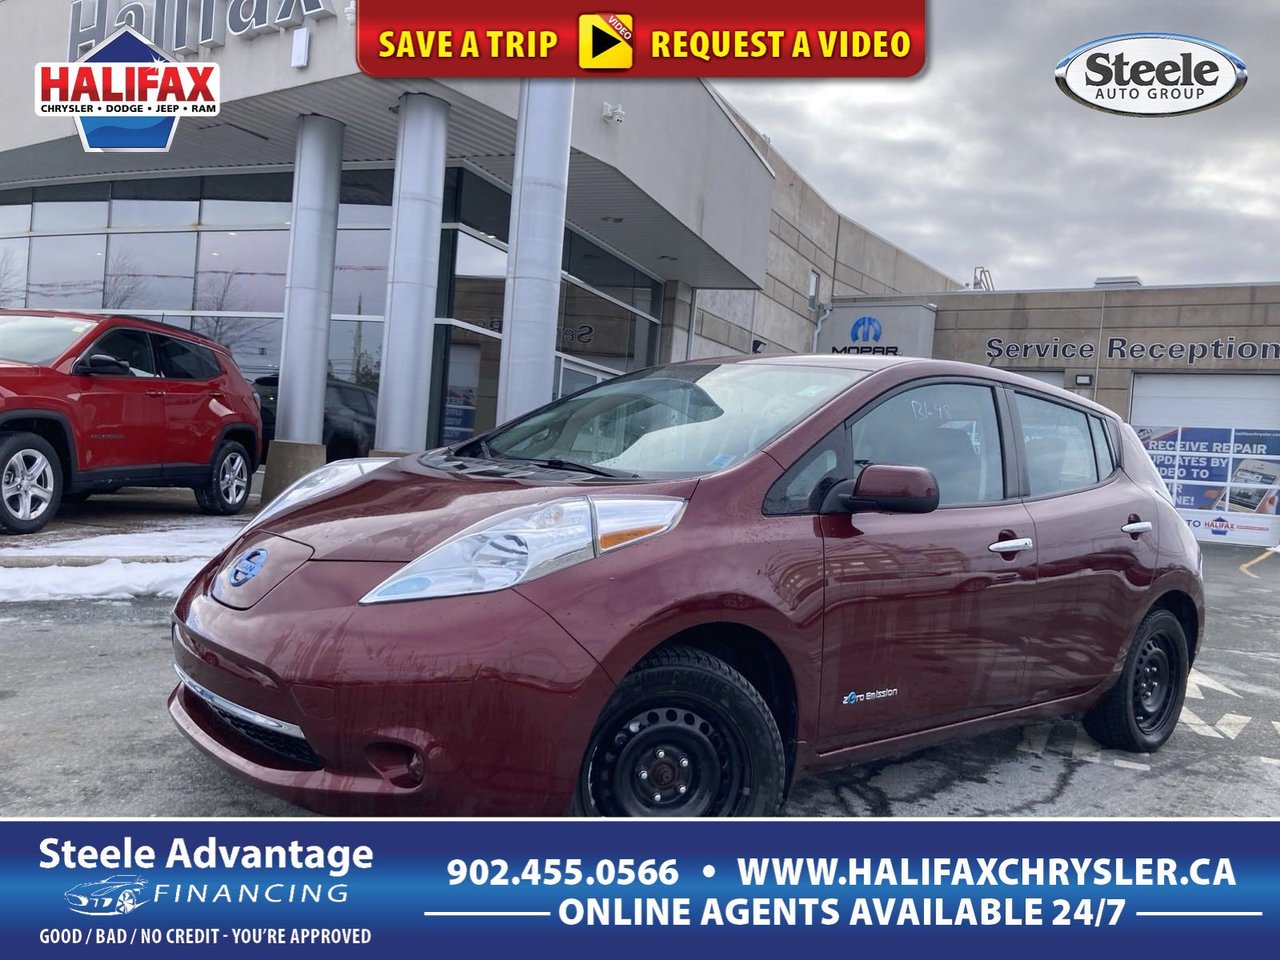 2017 Nissan Leaf S - BEV/ELECTRIC, LOW KM, HEATED SEATS, BACK UP CAMERA, POWER EQUIPMENT, LEVEL 1 CHARGER-0